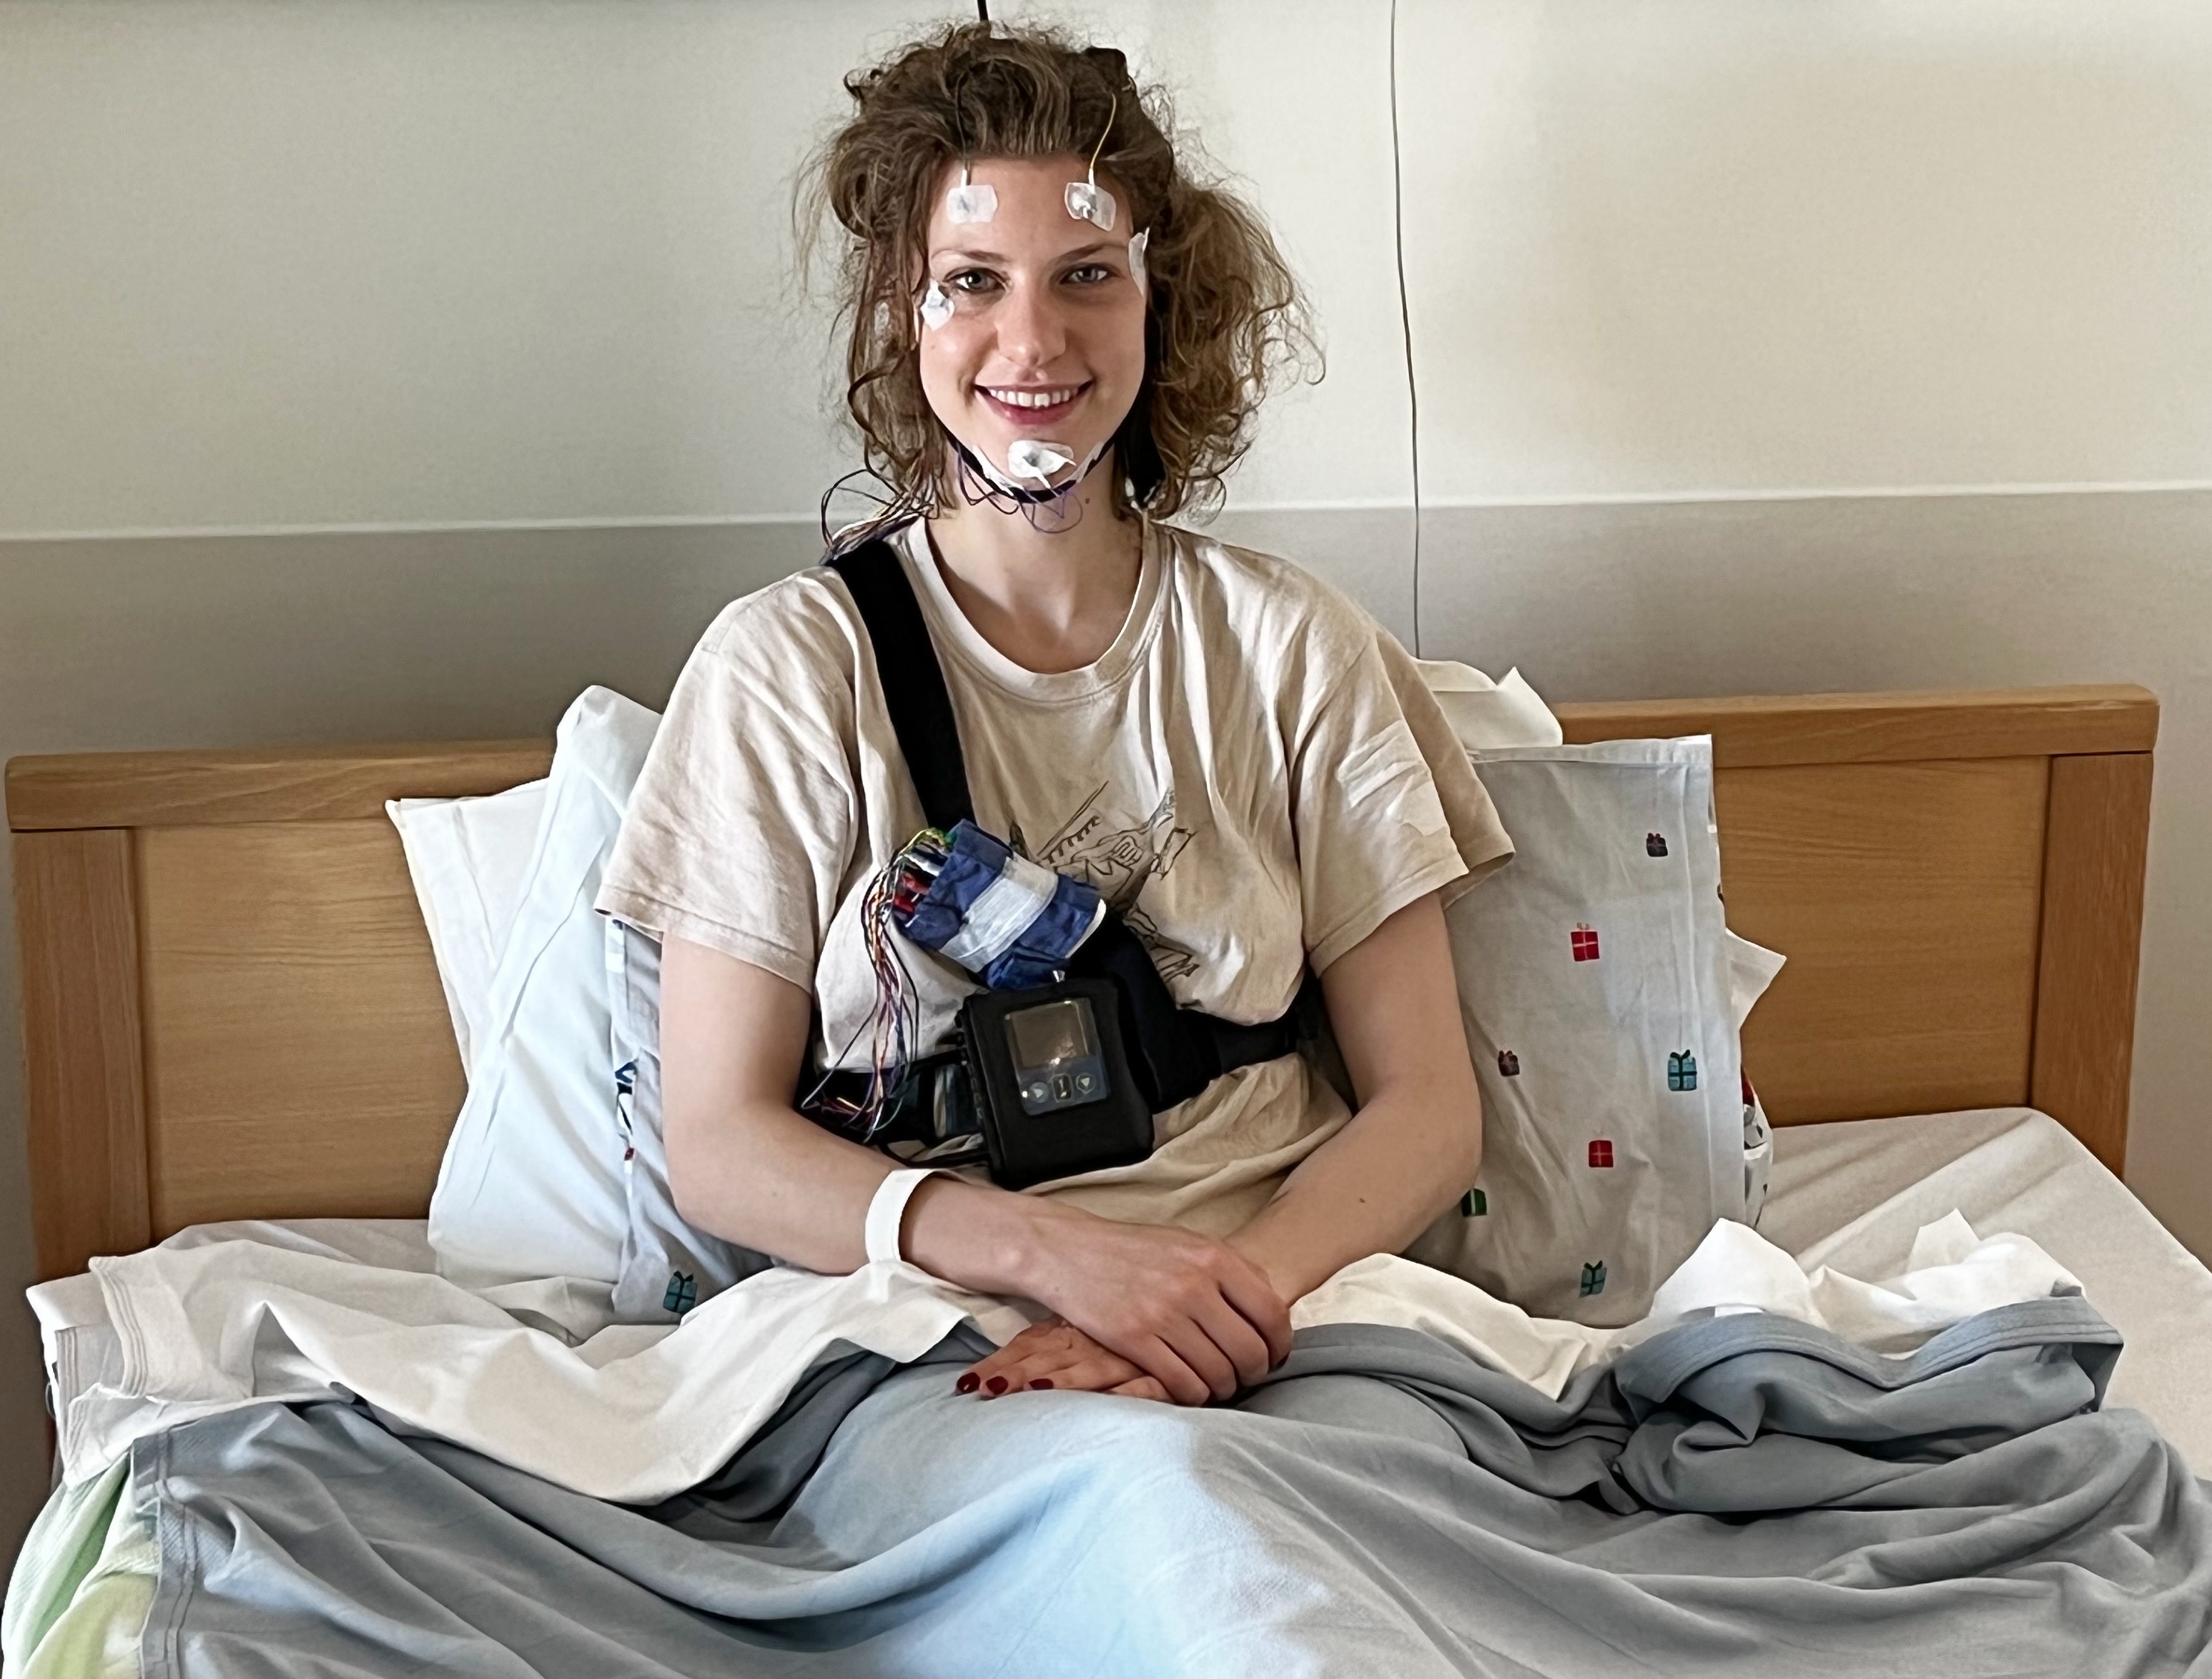 Helena sitting up in a hospital bed, with wires attached to her head and face.